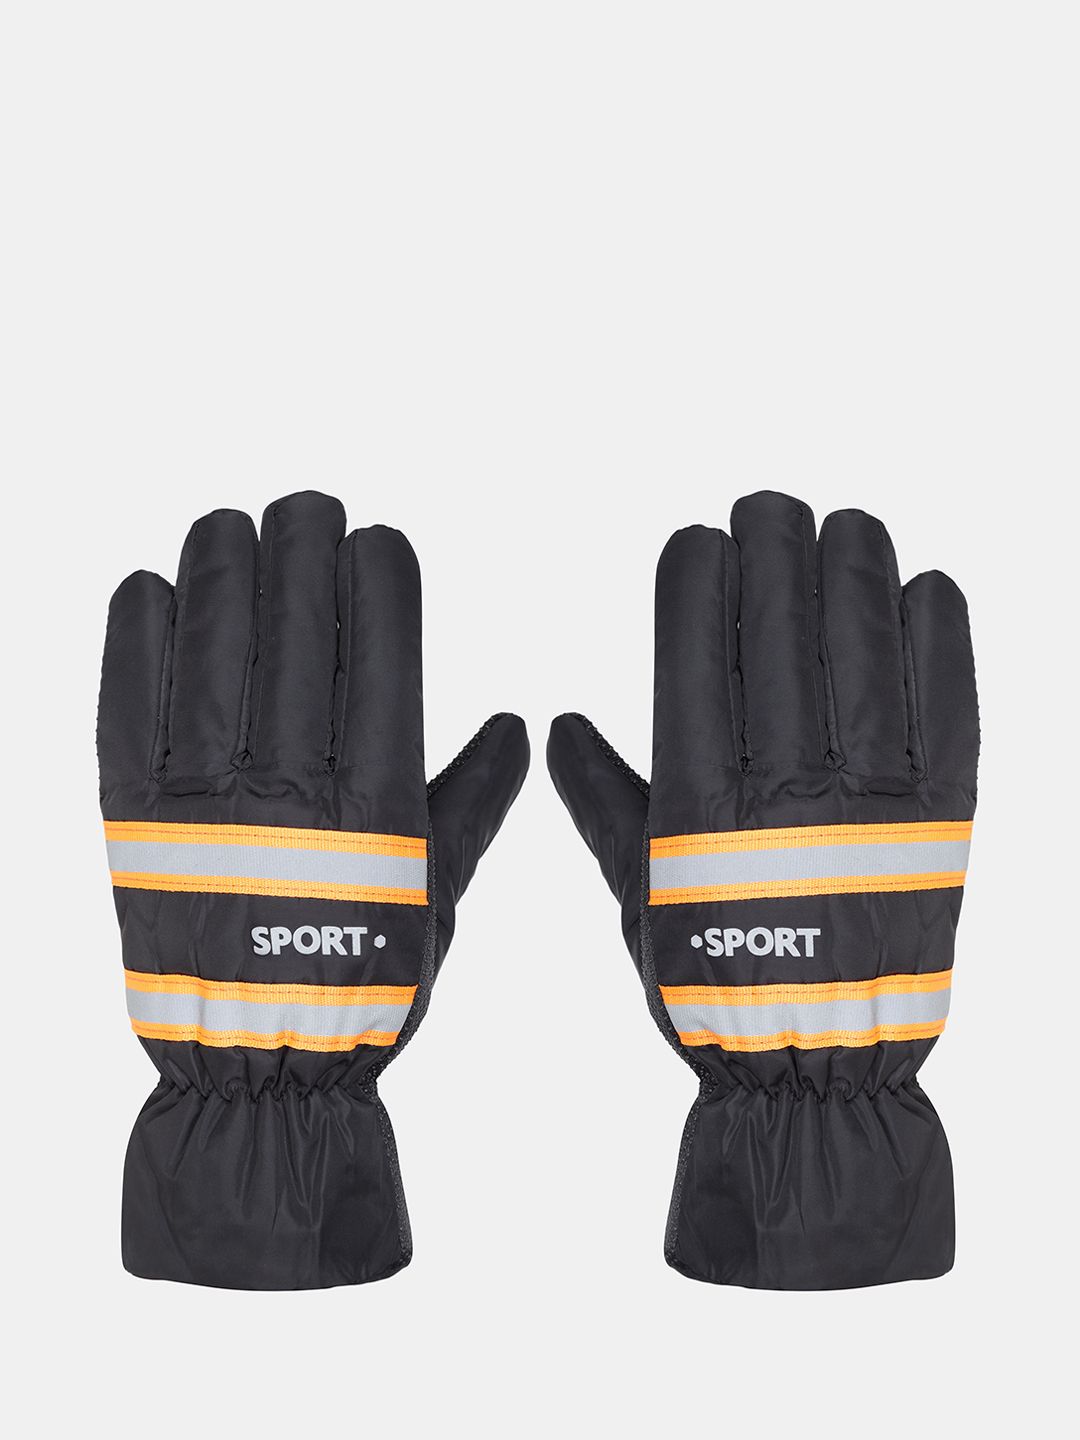 FabSeasons Unisex Winter Reflector Gloves Price in India